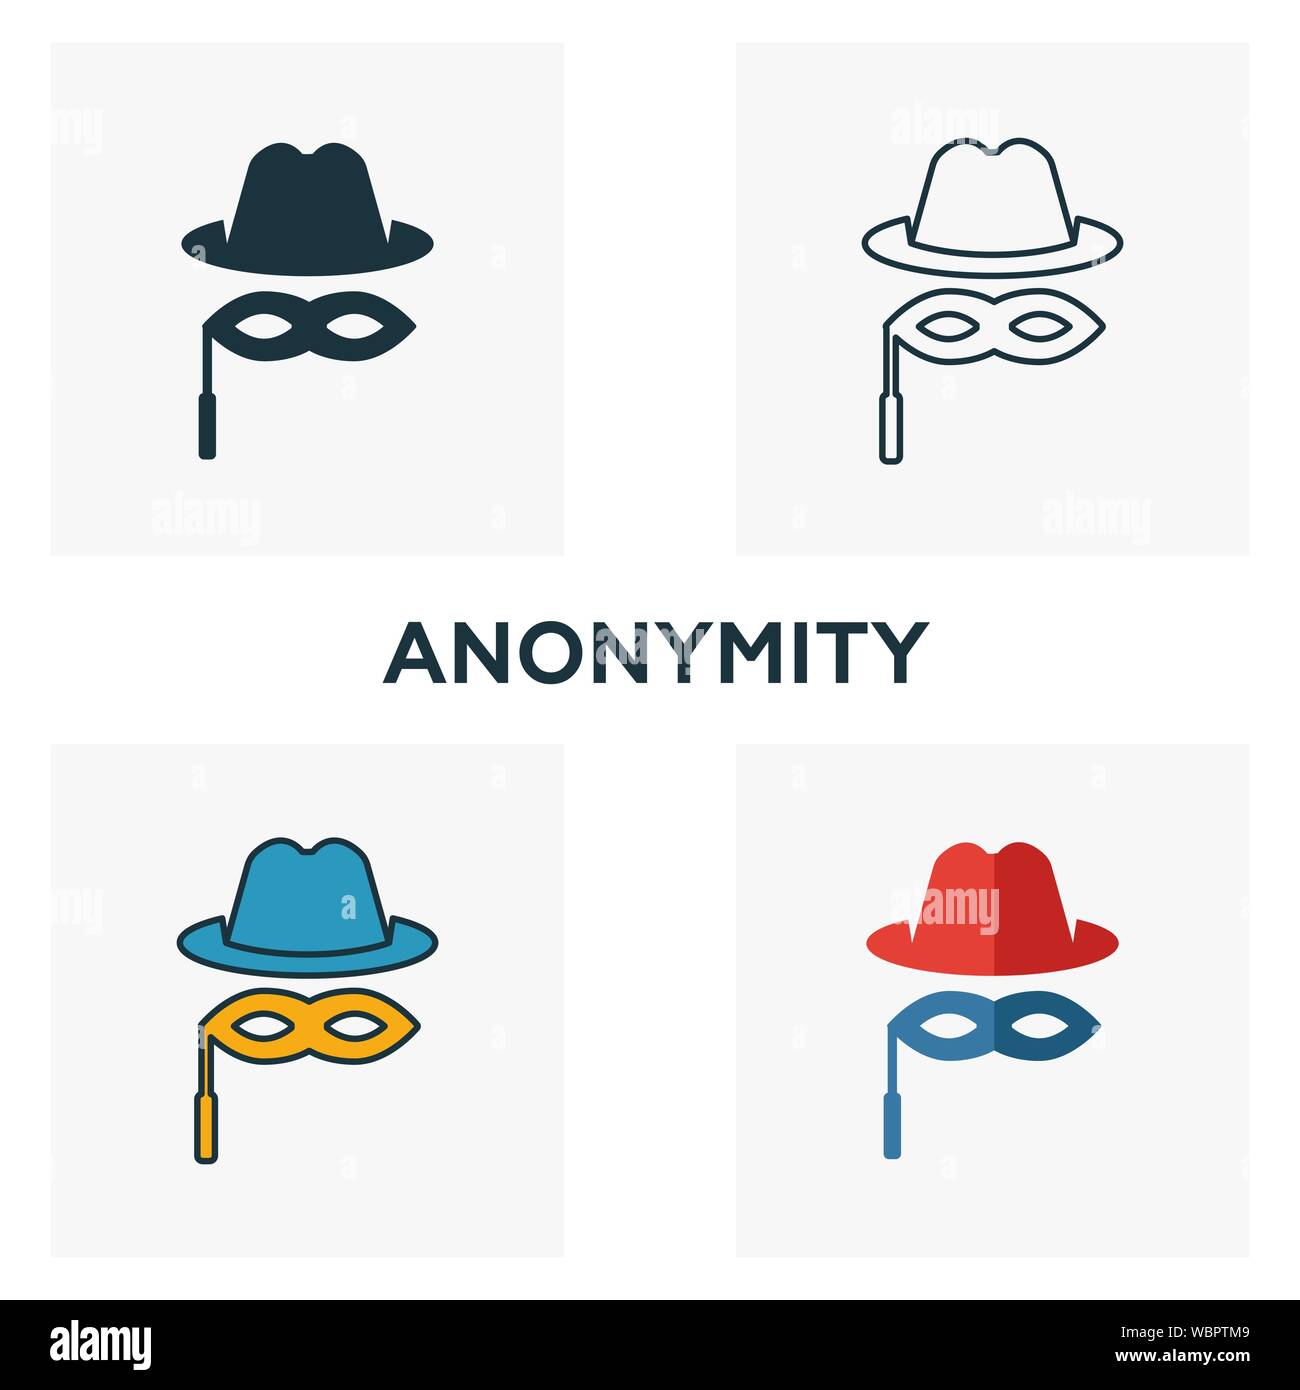 Anonymity icon set. Four elements in diferent styles from blockchain icons collection. Creative anonymity icons filled, outline, colored and flat Stock Vector